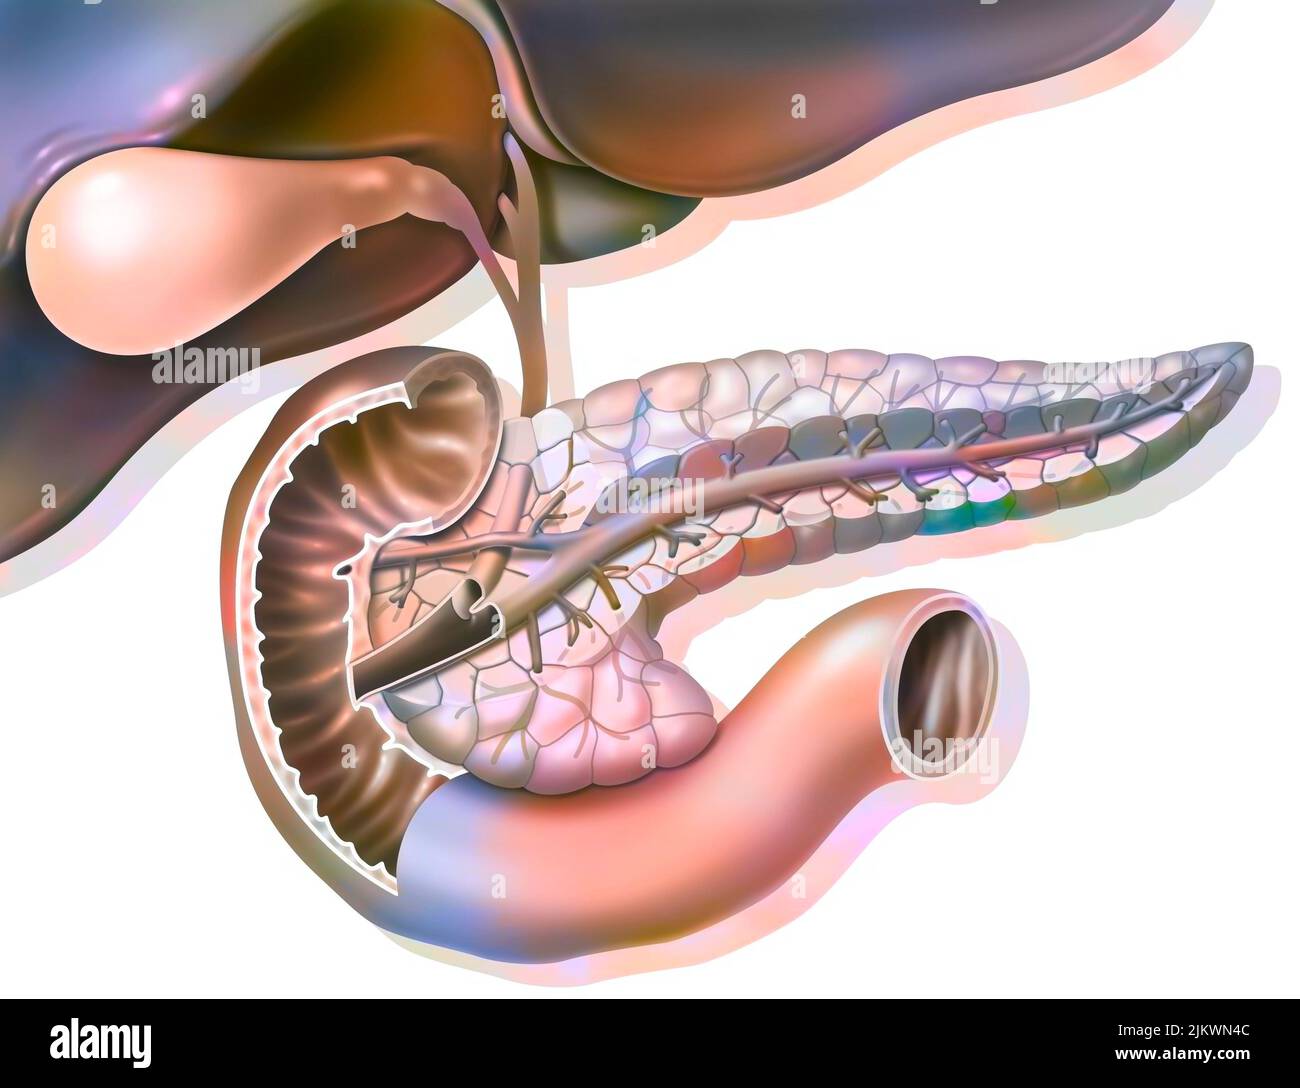 Sectional anatomy of the pancreas with gallbladder and common bile duct. Stock Photo